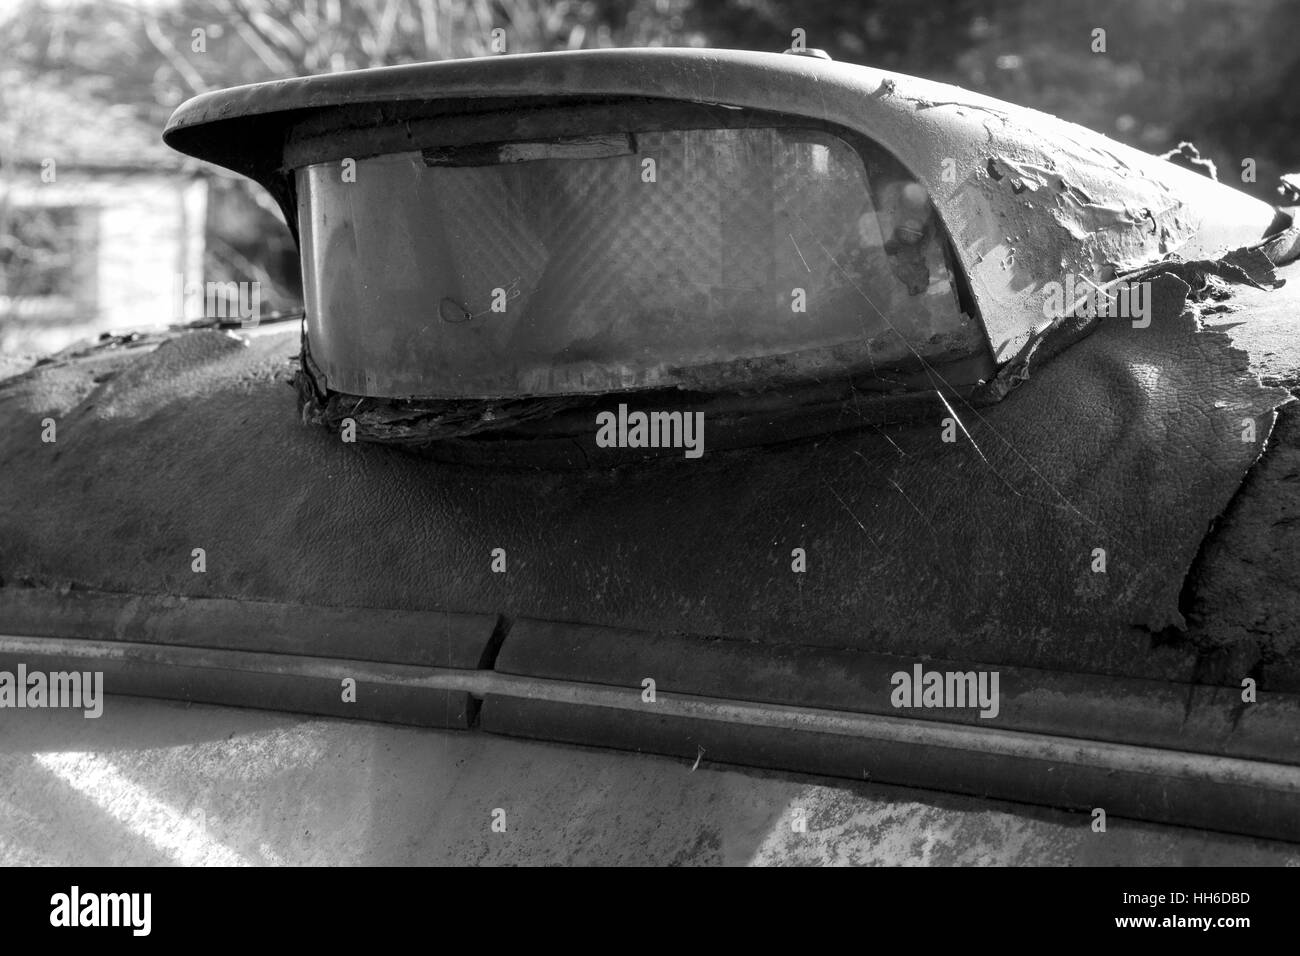 Black Cab to Nowhere: Monochrome Detail - Roof Light on an Abandoned Rusting and Dilapidated London Cab. Stock Photo